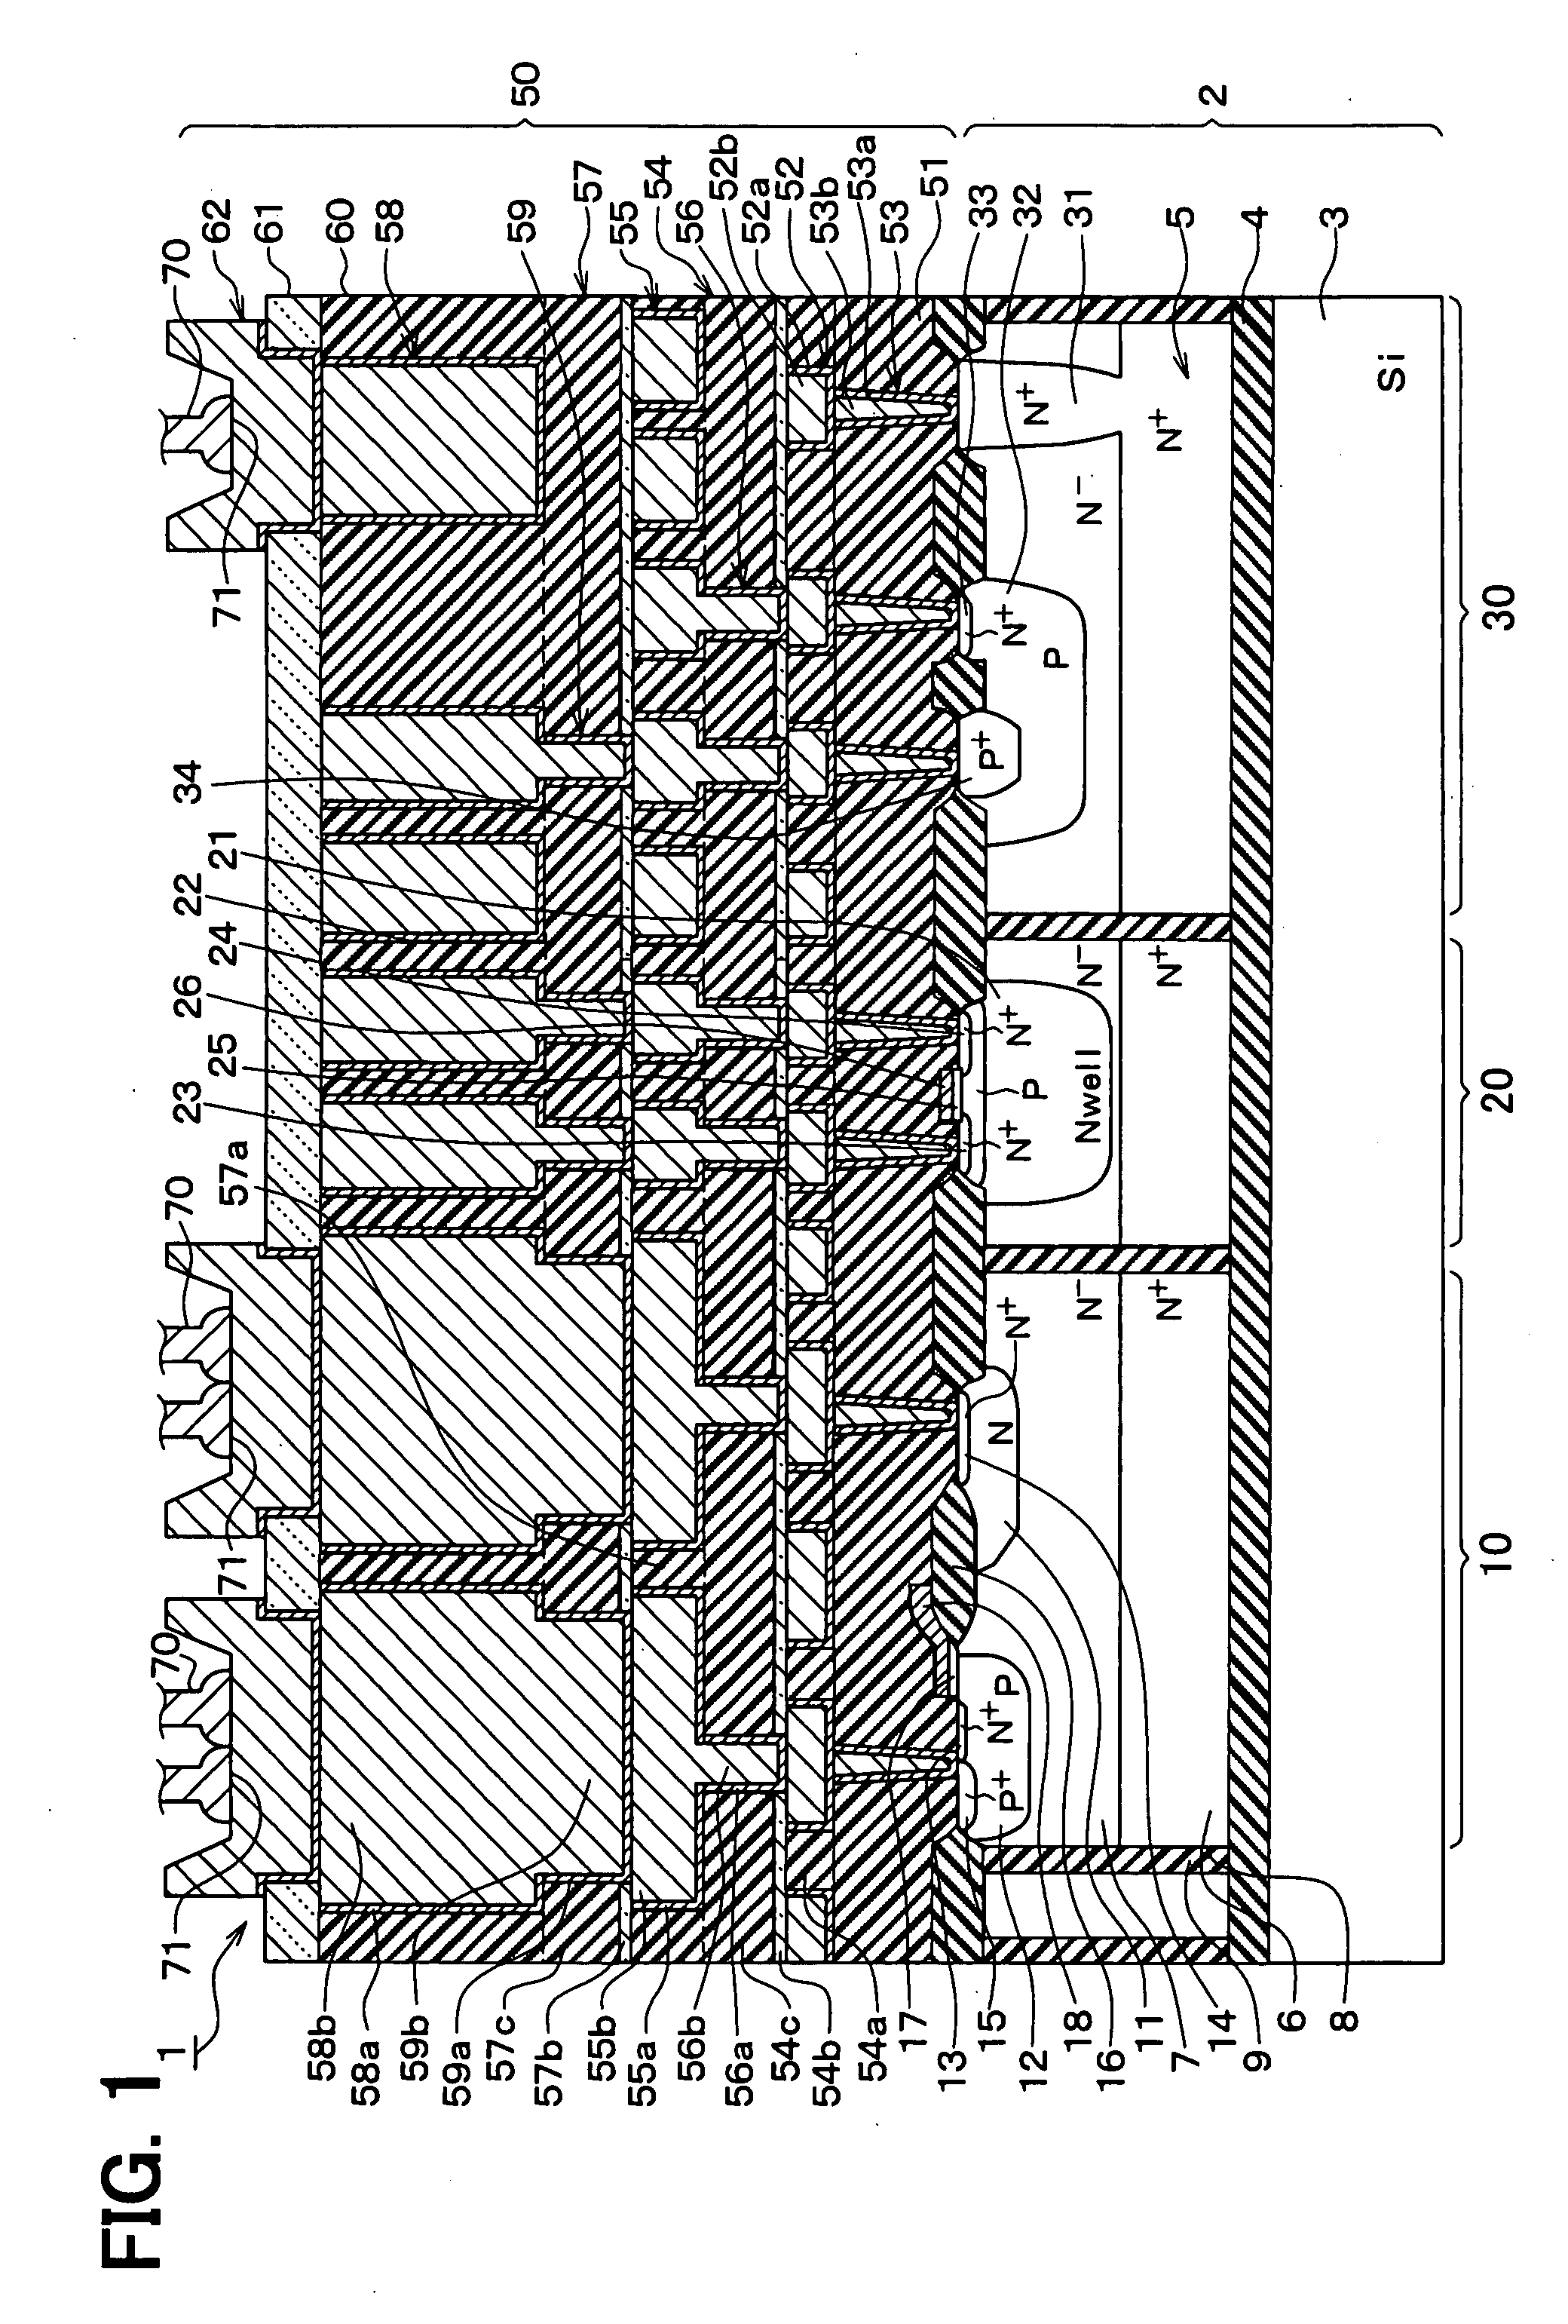 Semiconductor device, wiring of semiconductor device, and method of forming wiring